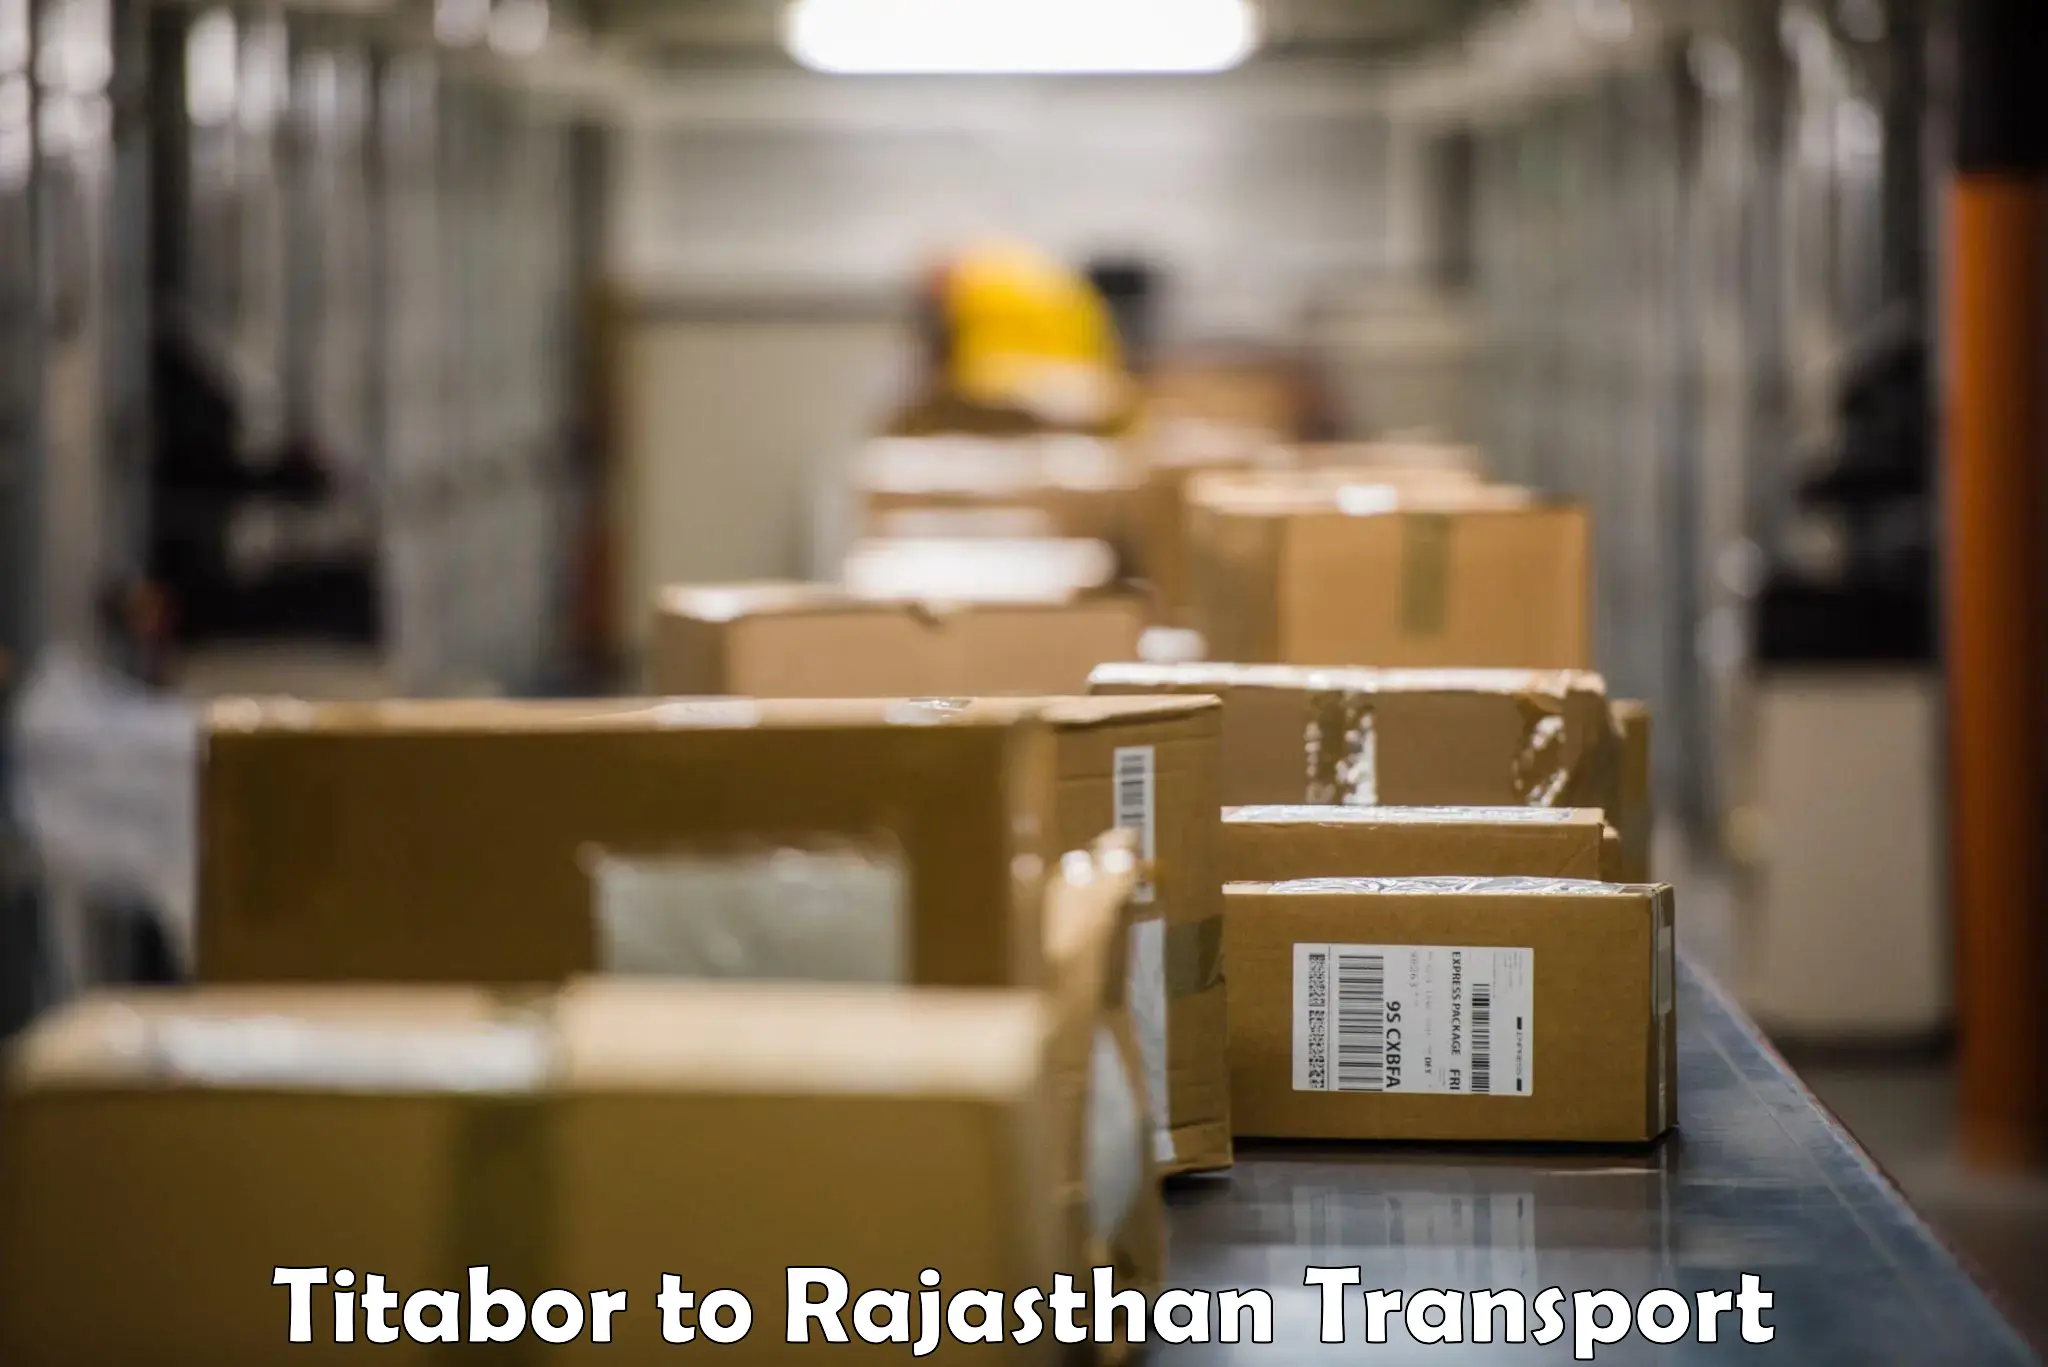 Truck transport companies in India Titabor to Sirohi